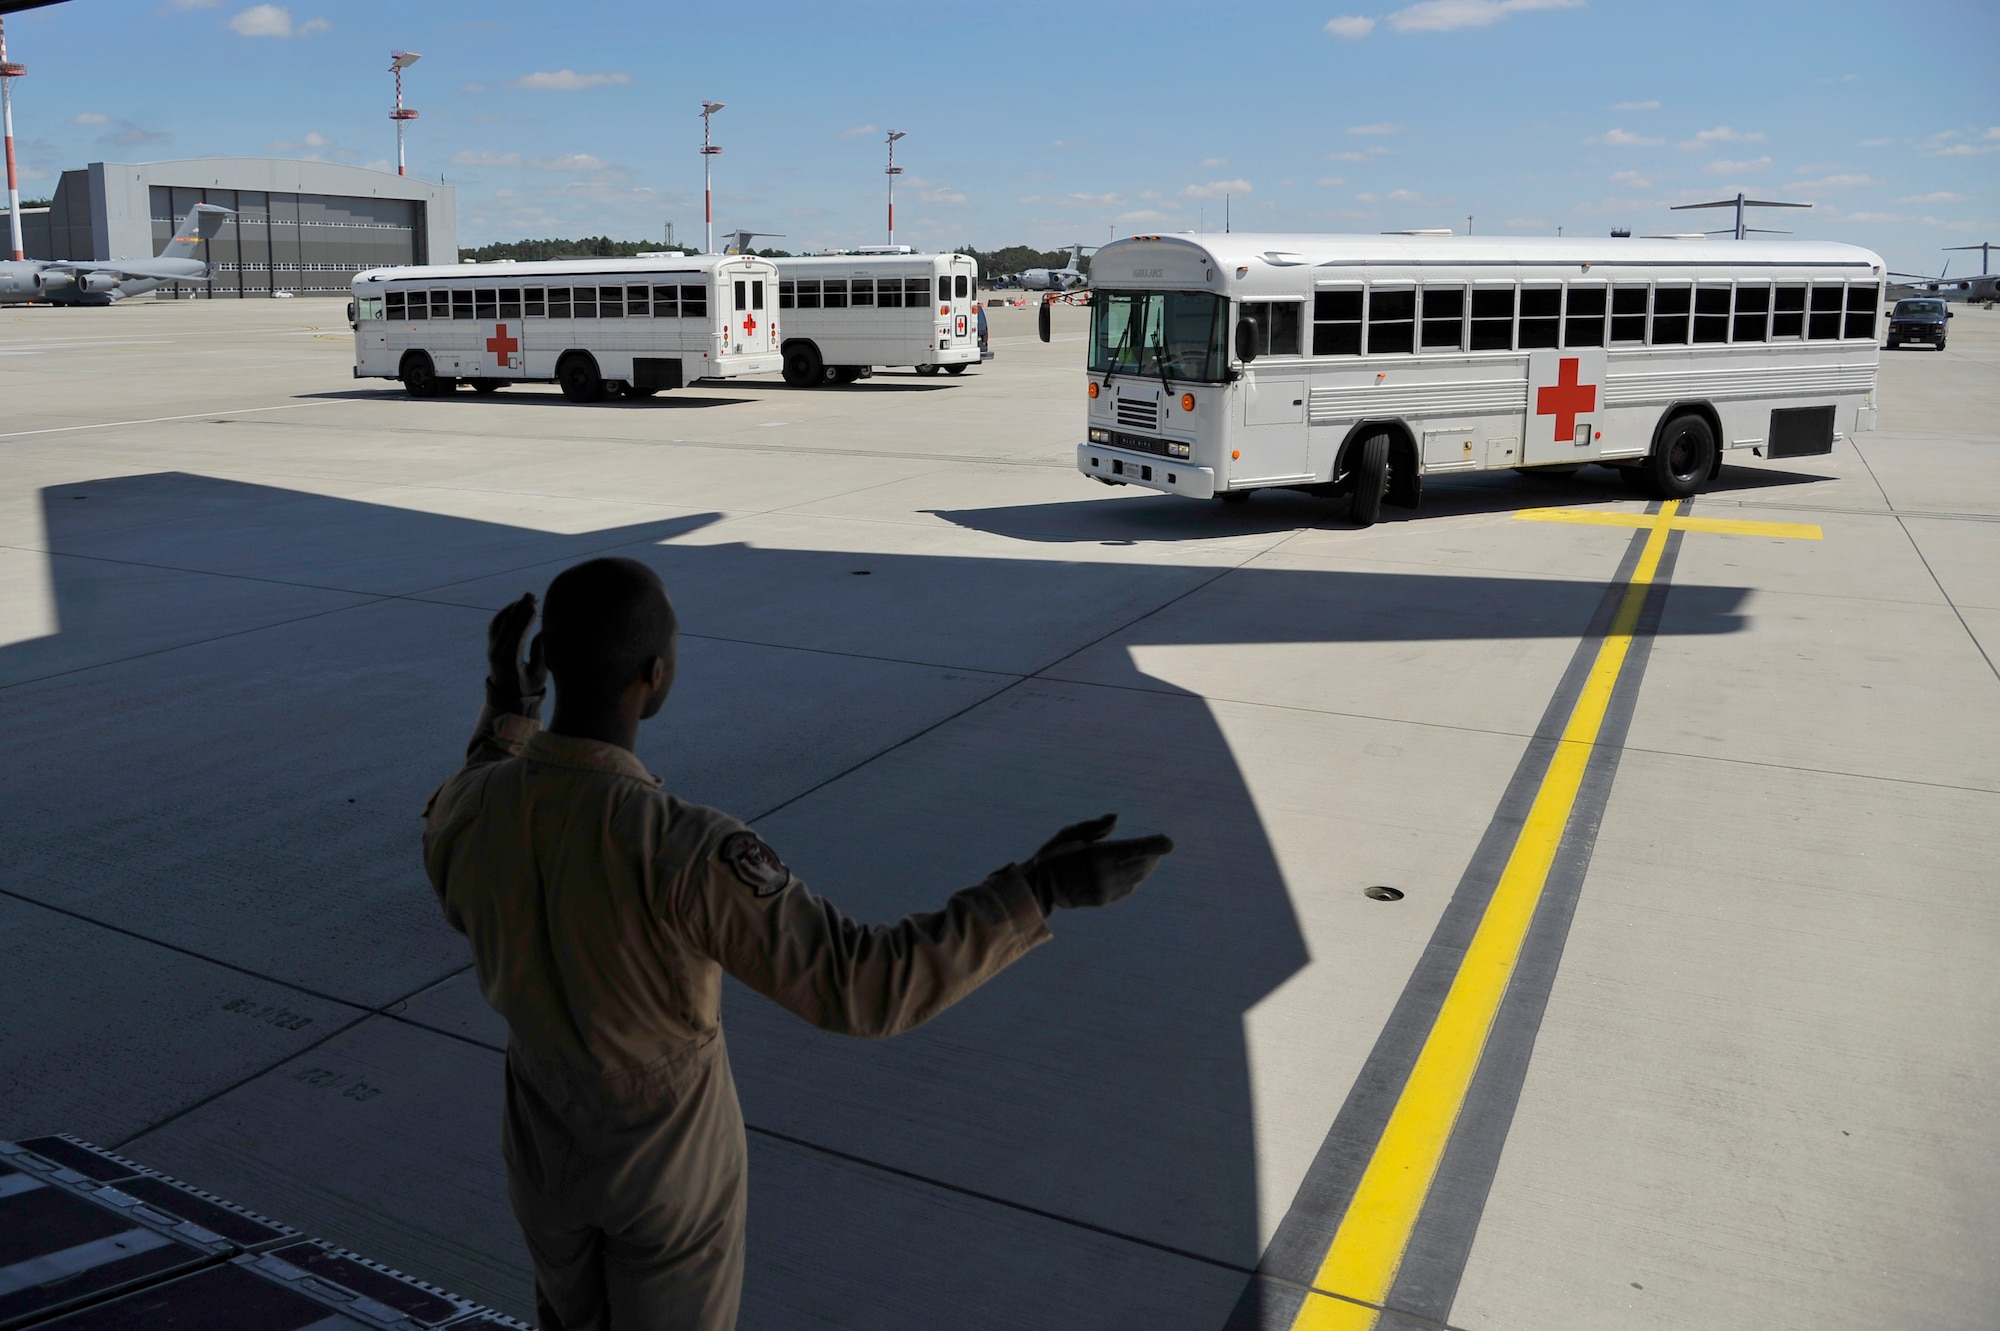 U.S. Air Force Staff. Sgt. Jeremy McCray, 105th Airlift Wing C-17 Globemaster III loadmaster, signals an ambulance bus away during a patient move on Ramstein Air Base, Germany, July 13, 2017. Mission frequencies vary, however, En-route Patient Staging Facility personnel perform between two and 10 patient moves on a weekly basis. (U.S. Air Force photo by Airman 1st Class D. Blake Browning)